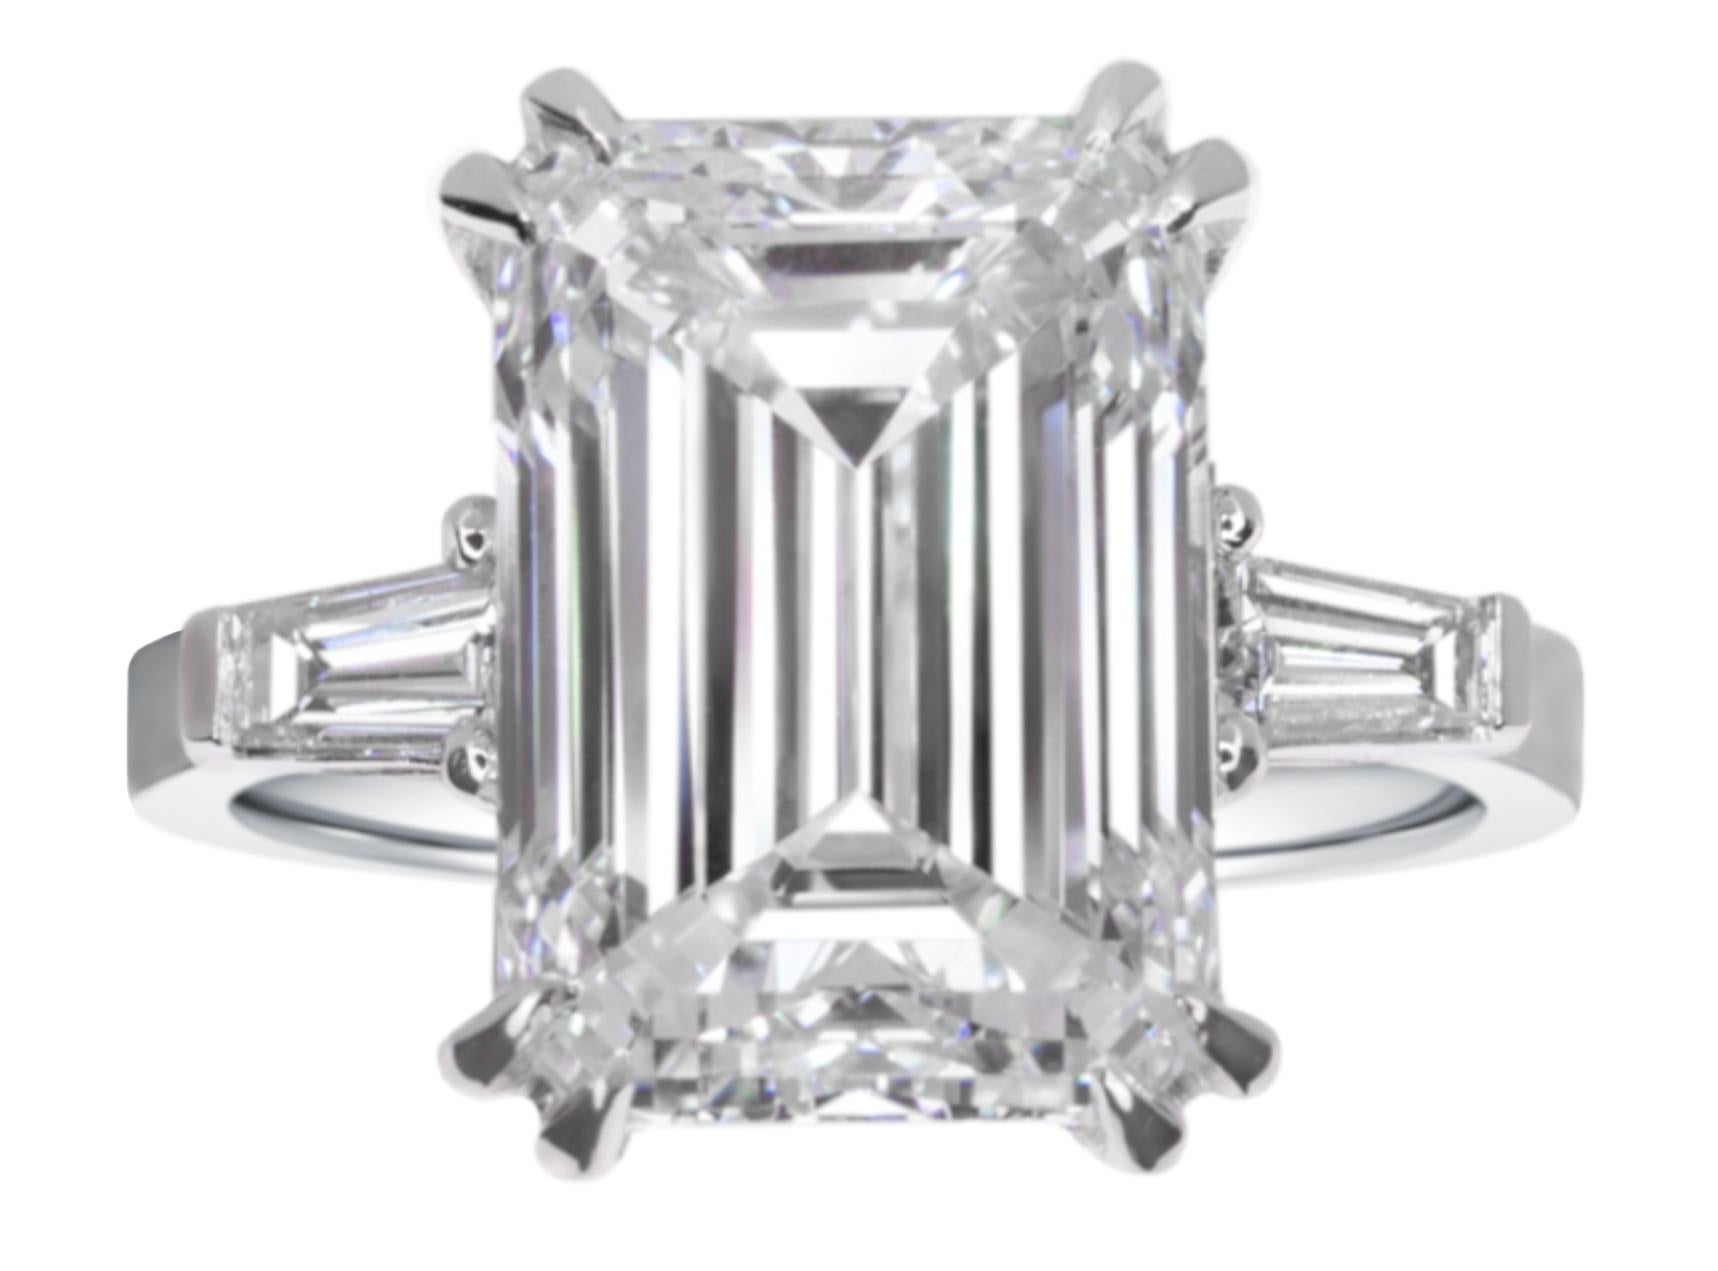 Presenting an exquisite GIA-certified emerald-cut diamond ring that radiates sophistication and timeless allure.

Center Diamond:
At the heart of this captivating piece is a GIA-certified emerald-cut diamond, weighing an impressive 4 carats. Graced